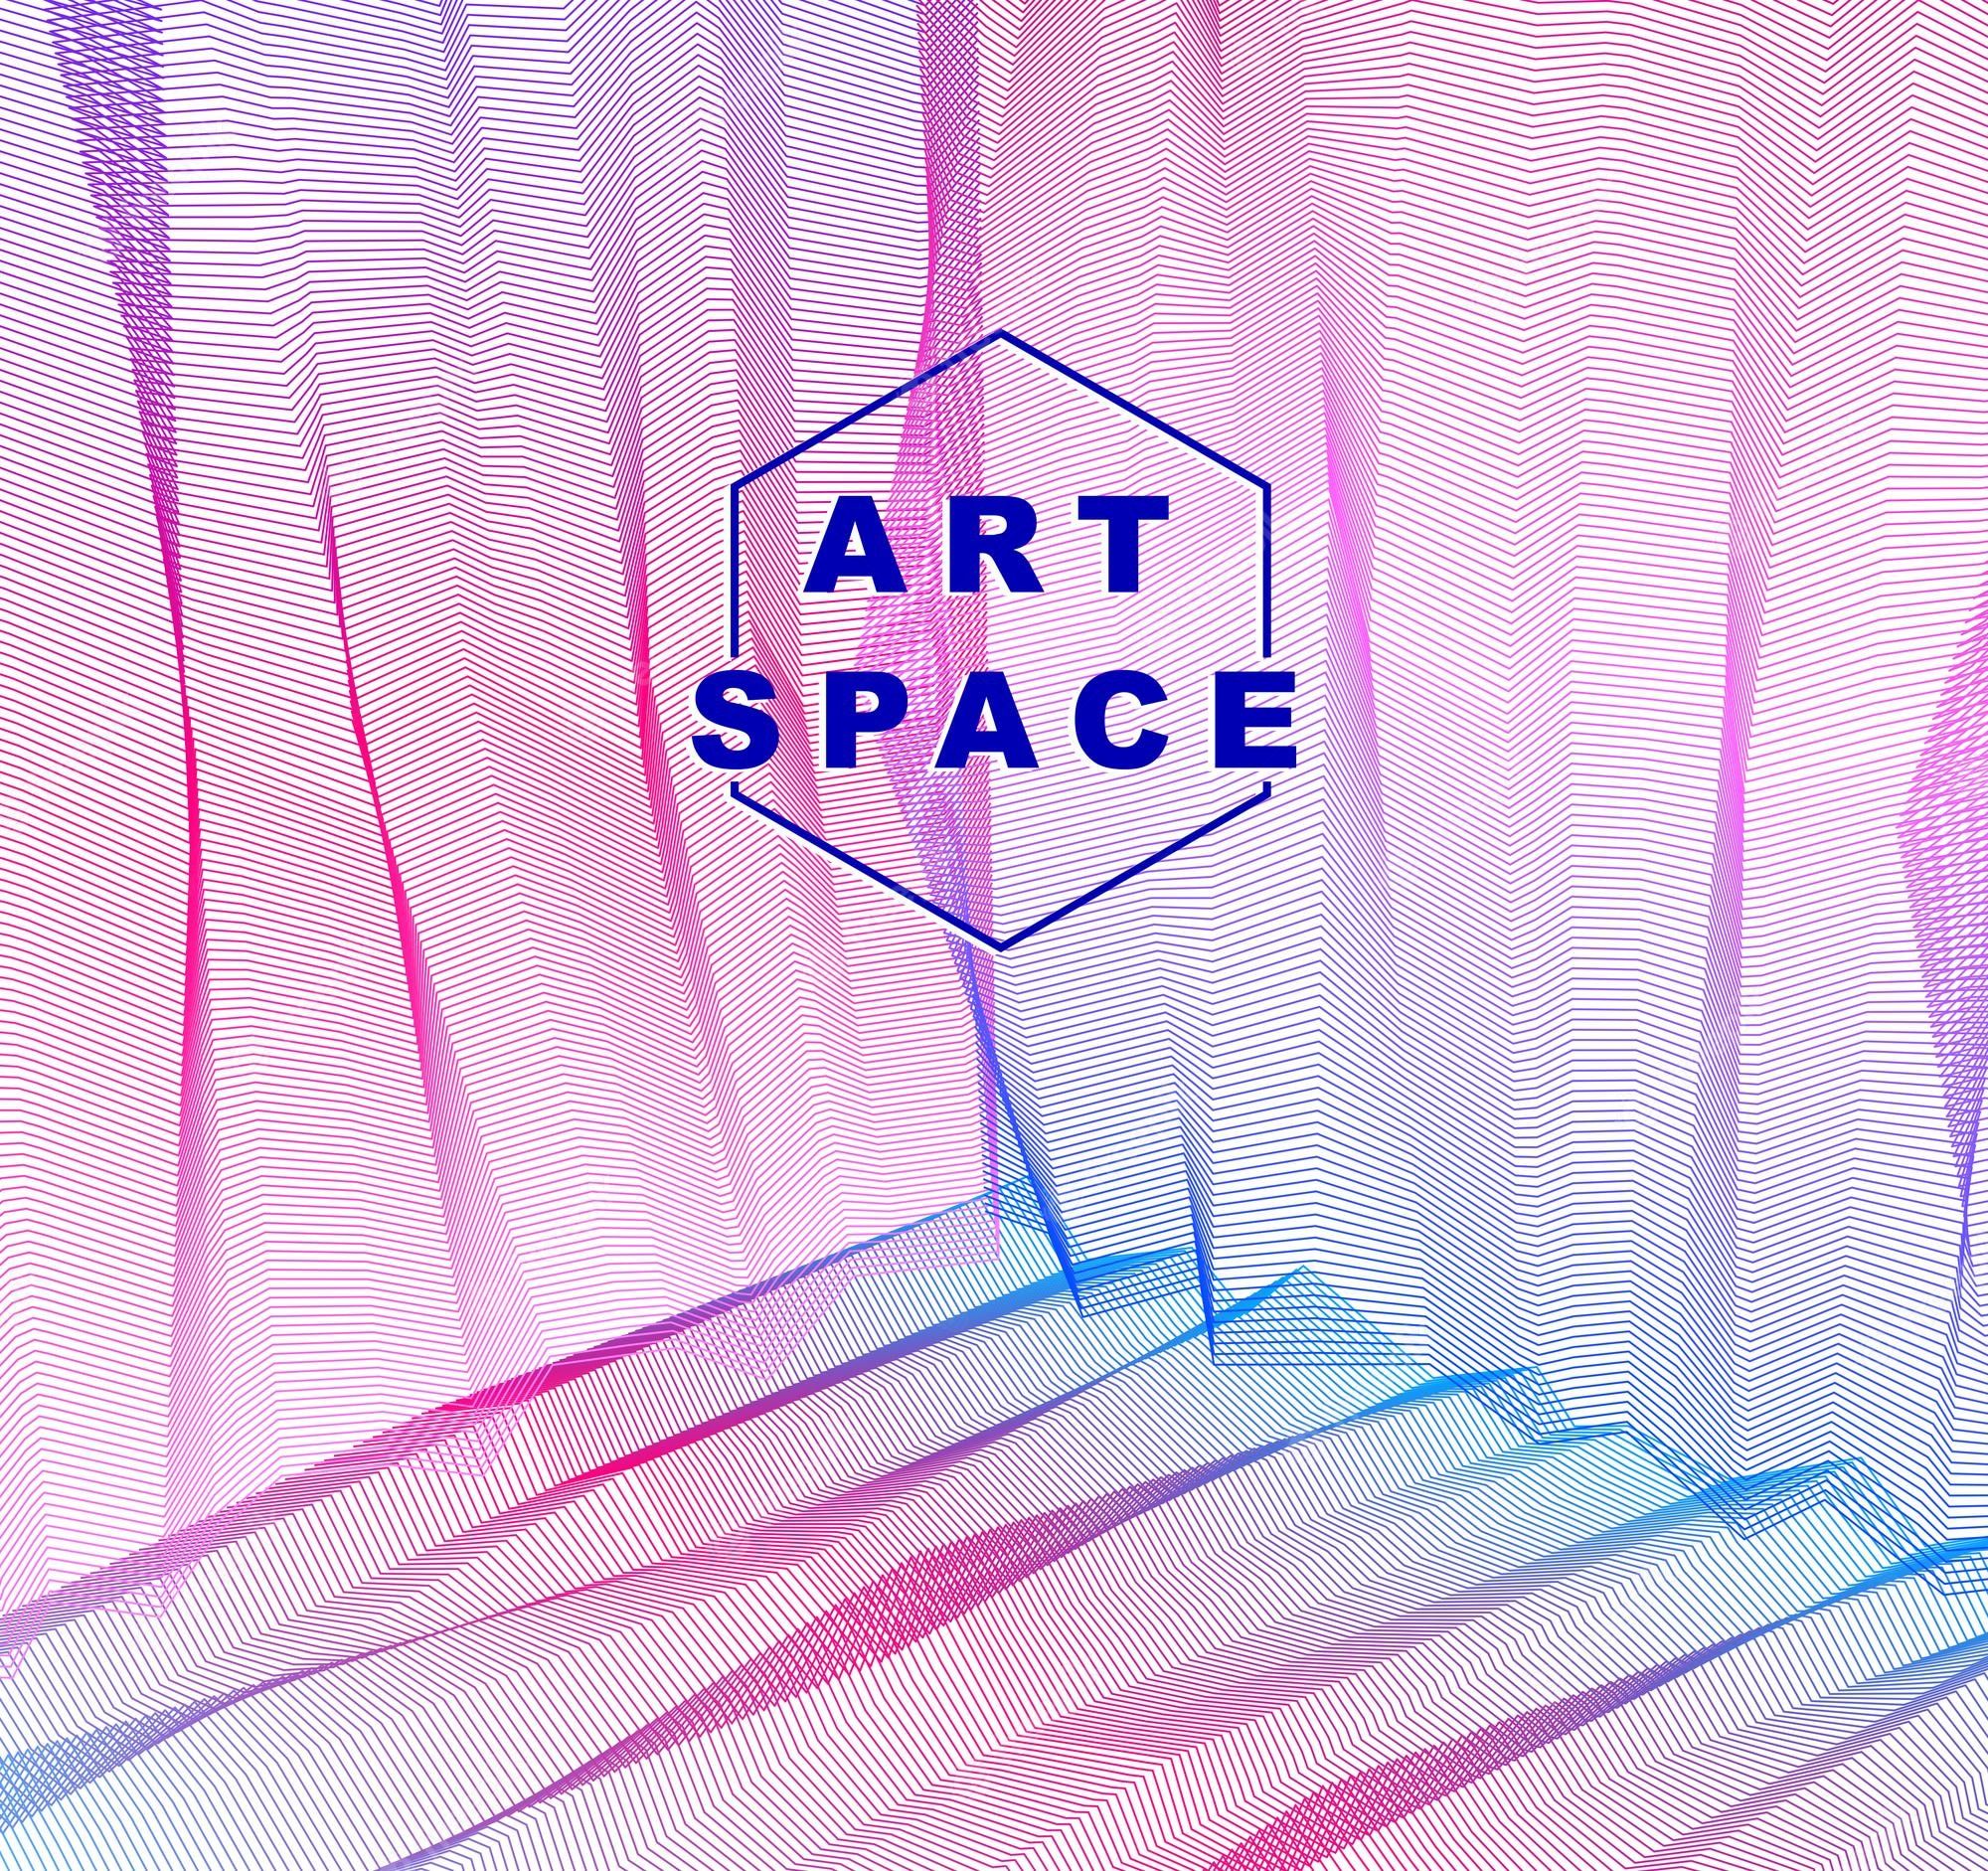 Art space abstract background with neon light - 3D